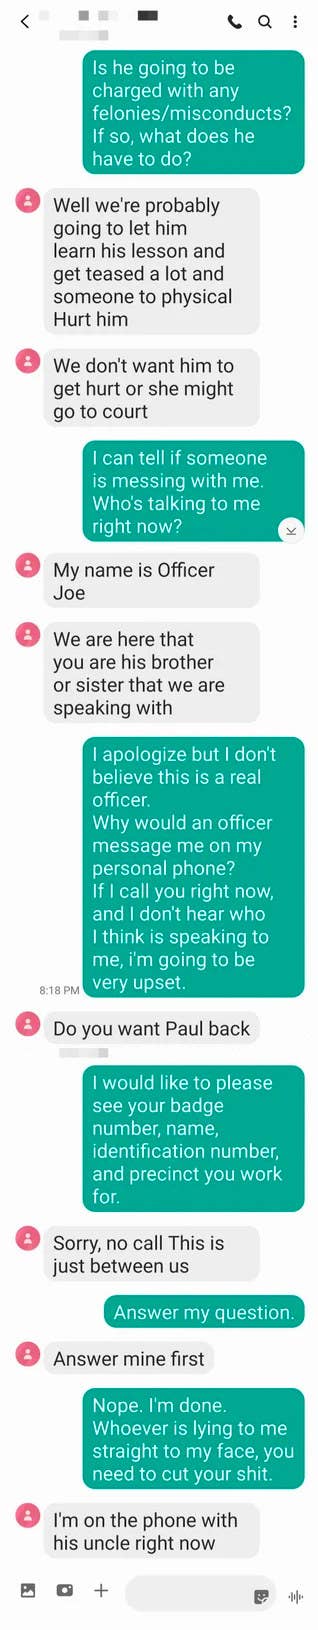 The ex pretends to be a police officer who has arrested someone and threatens to harm them, then asks the recipient &quot;do you want Paul back,&quot; presumably talking about themselves